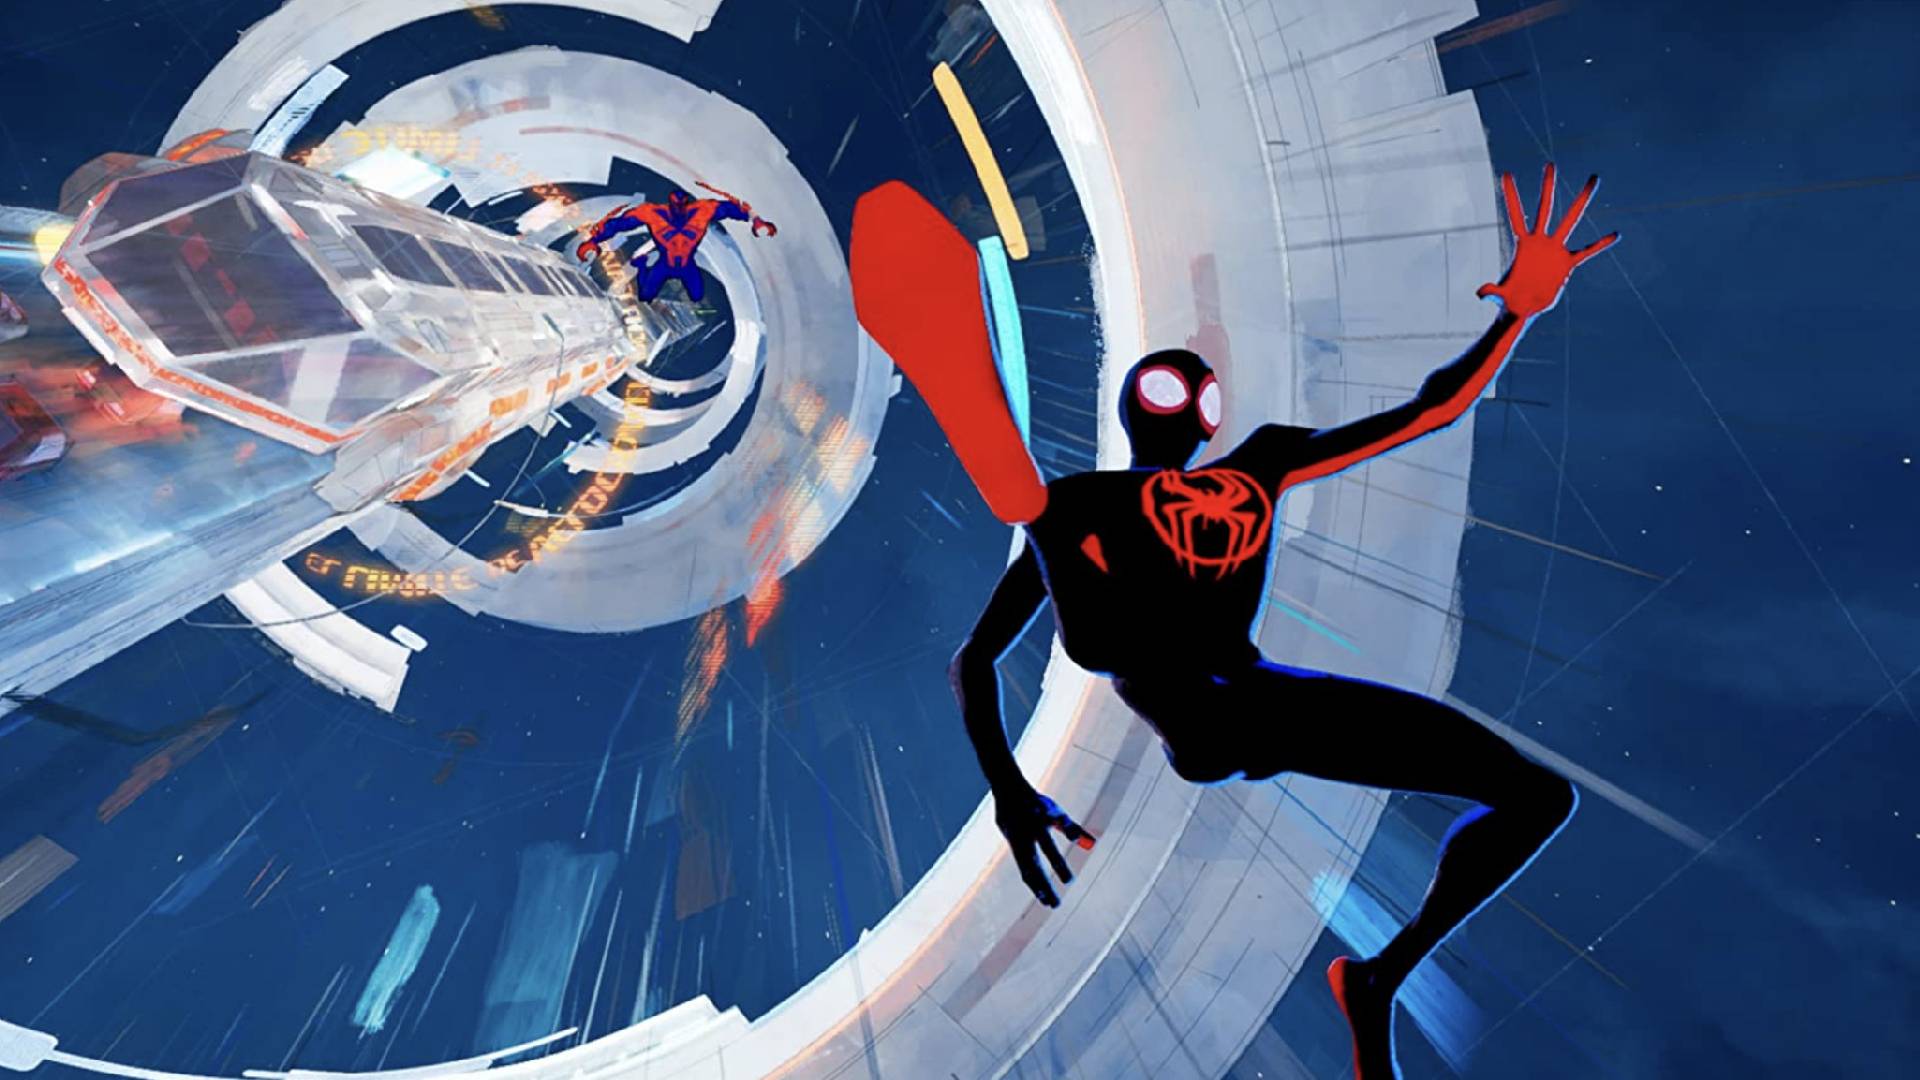 Spider-Man: Across the Spider-Verse to Release on Netflix